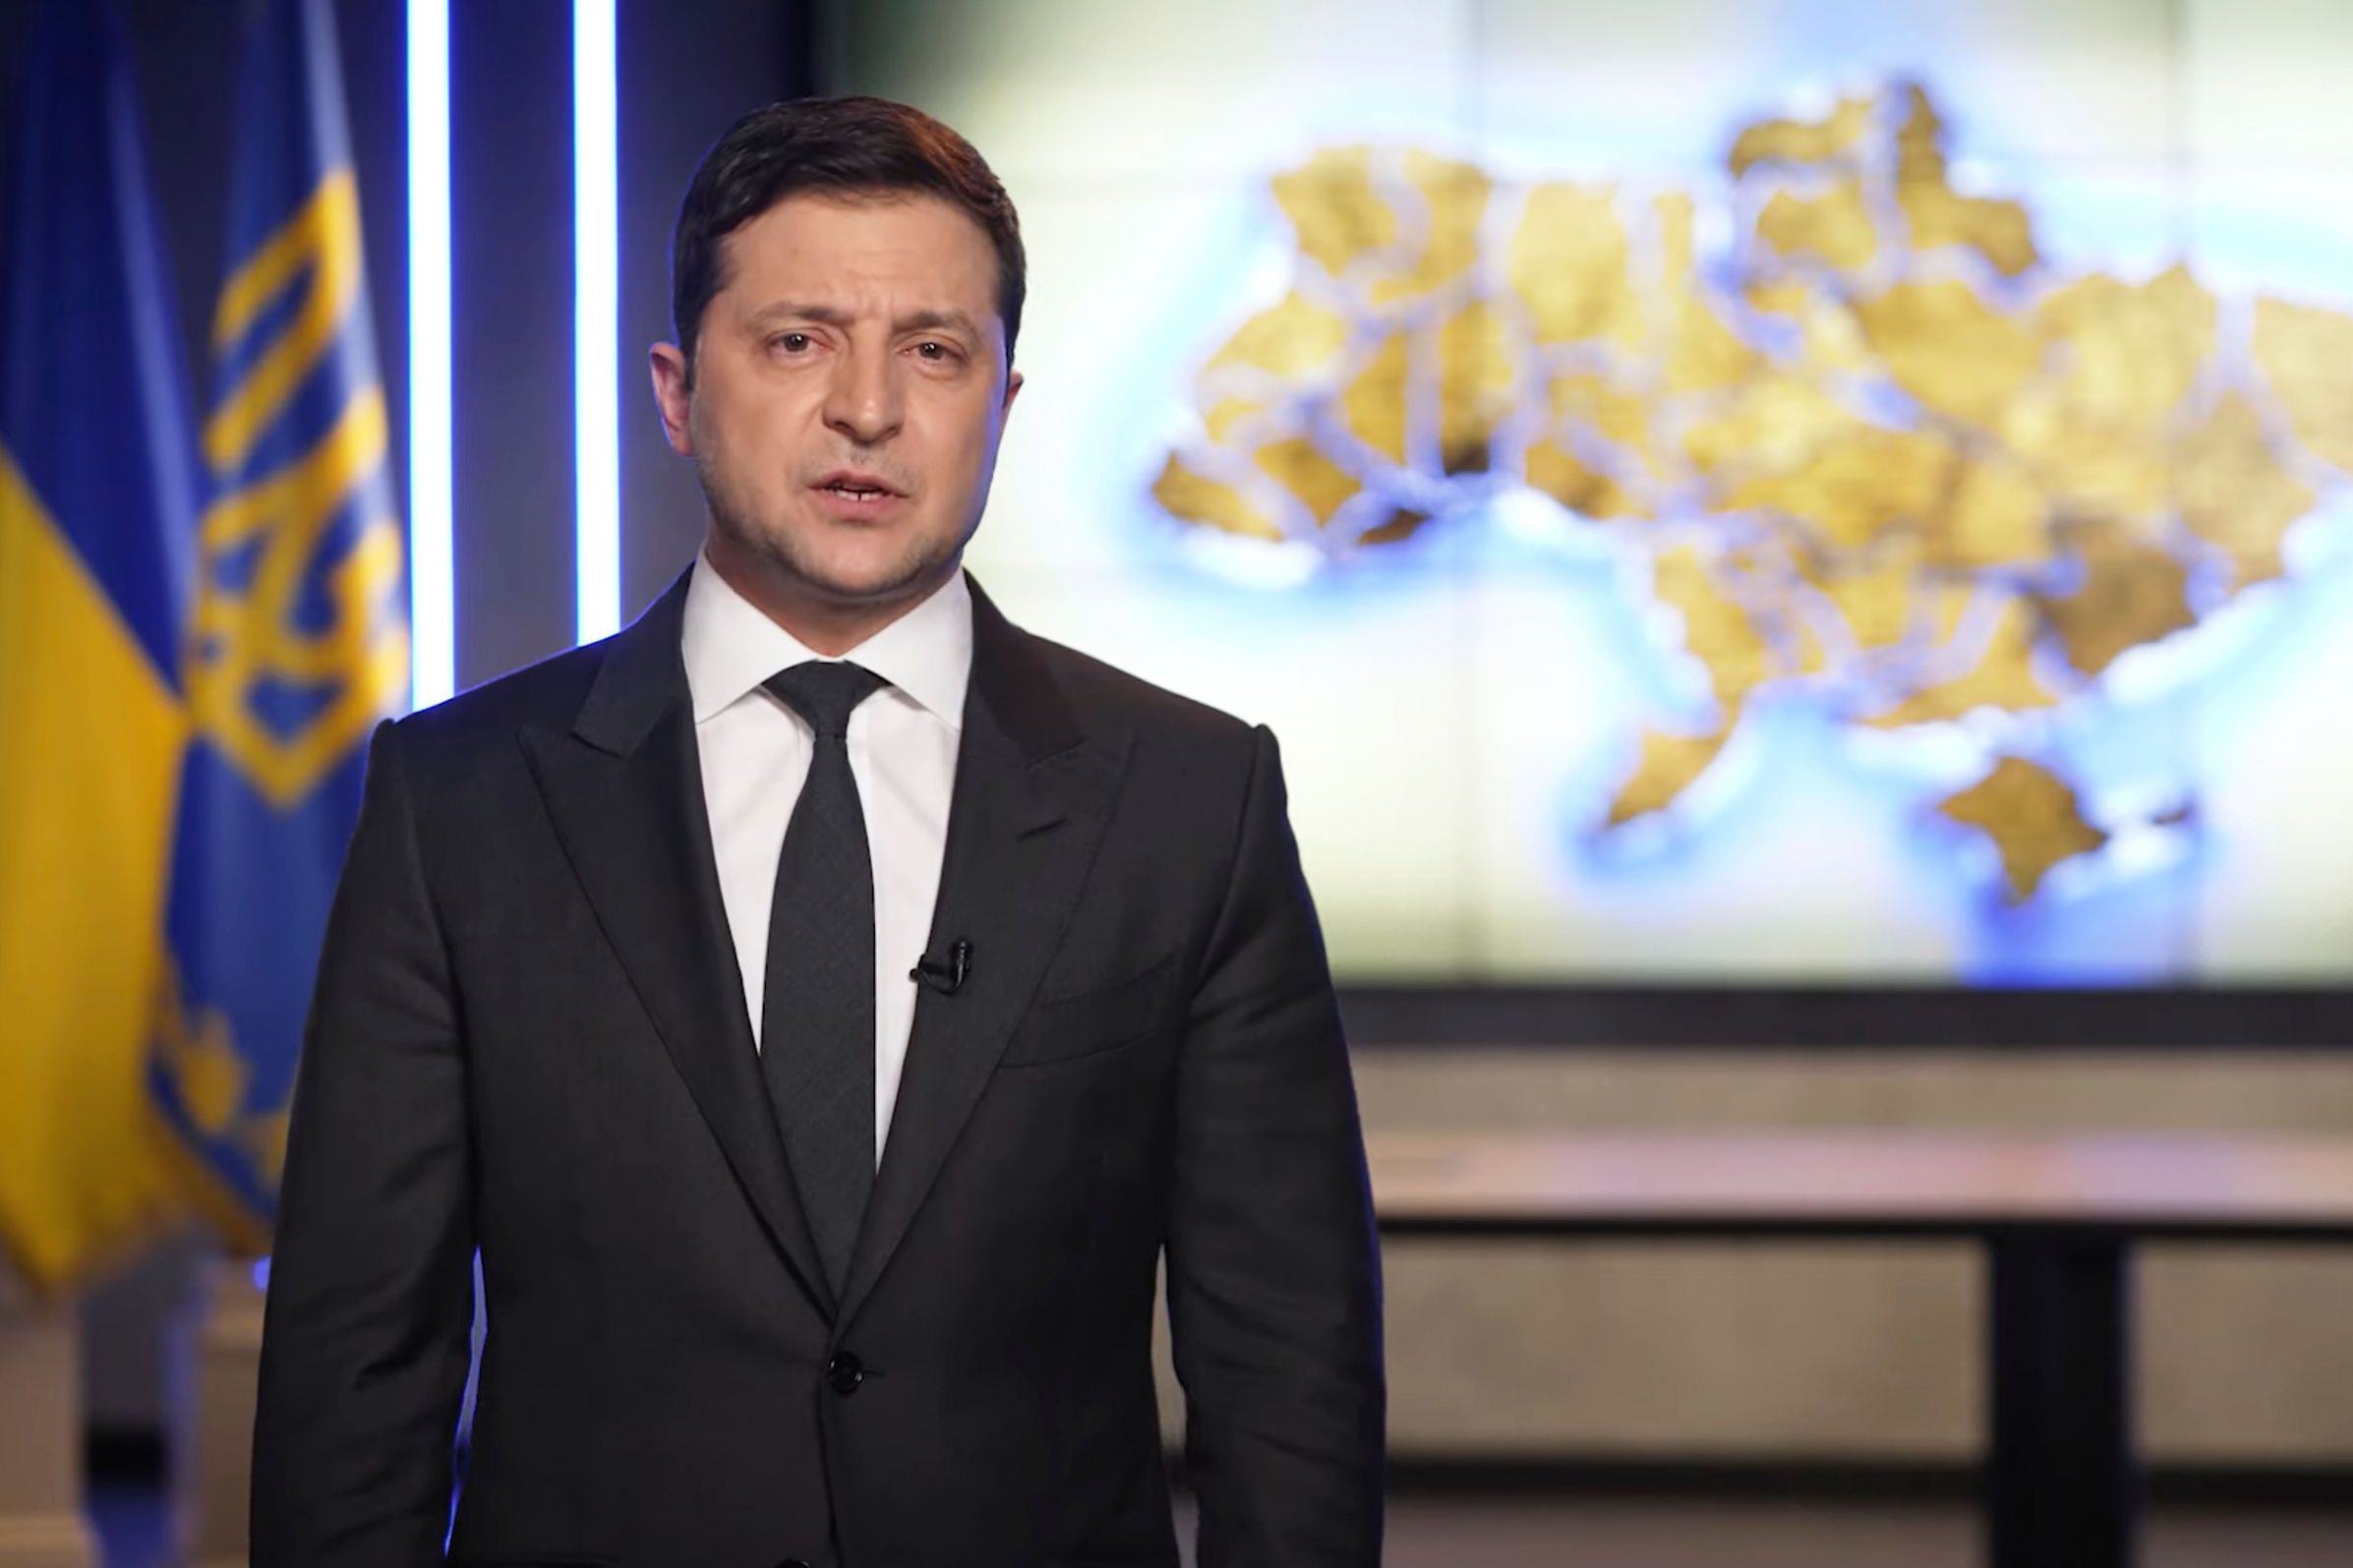 Zelensky’s series ‘Servant of The People’ sold to UKs Channel 4, others